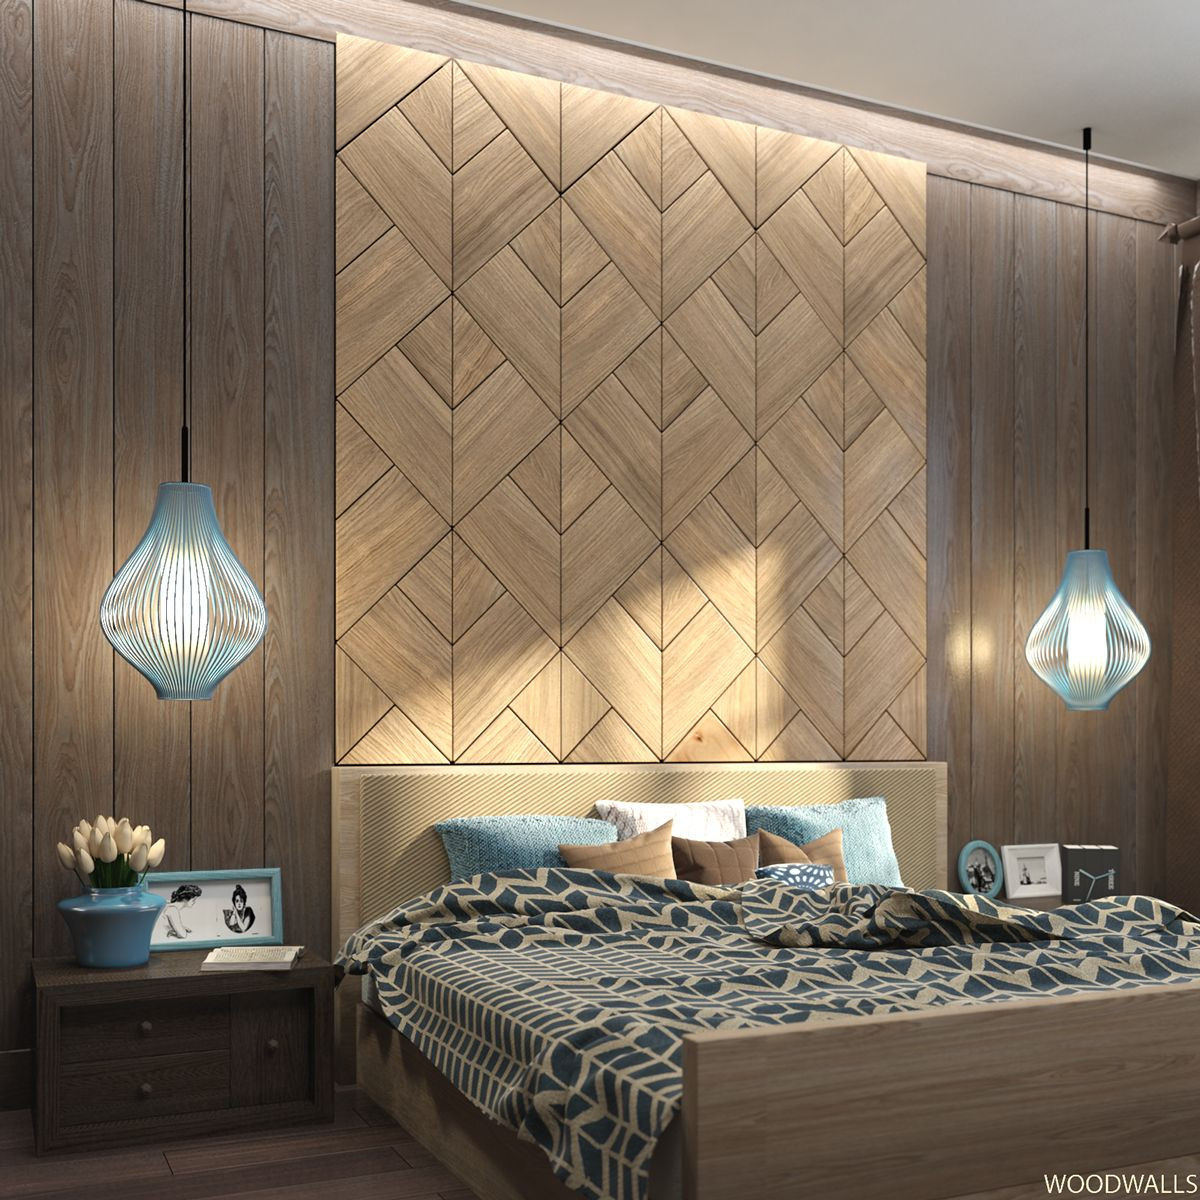 Wooden Wall Panels For Bedroom
 WOODWALL Tulip wood panels for bedrooms on Behance